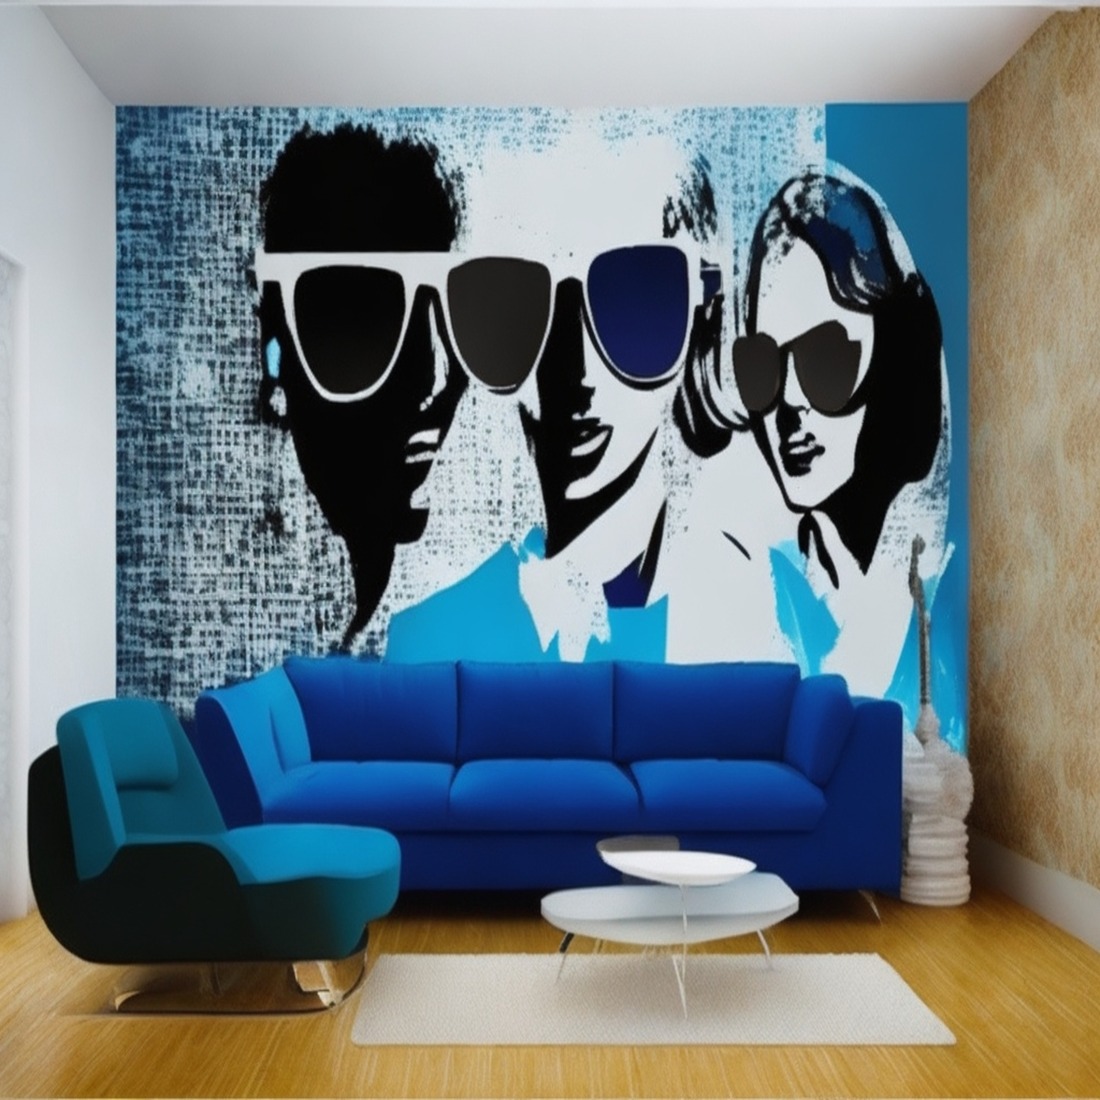 Interior wall art background design preview image.